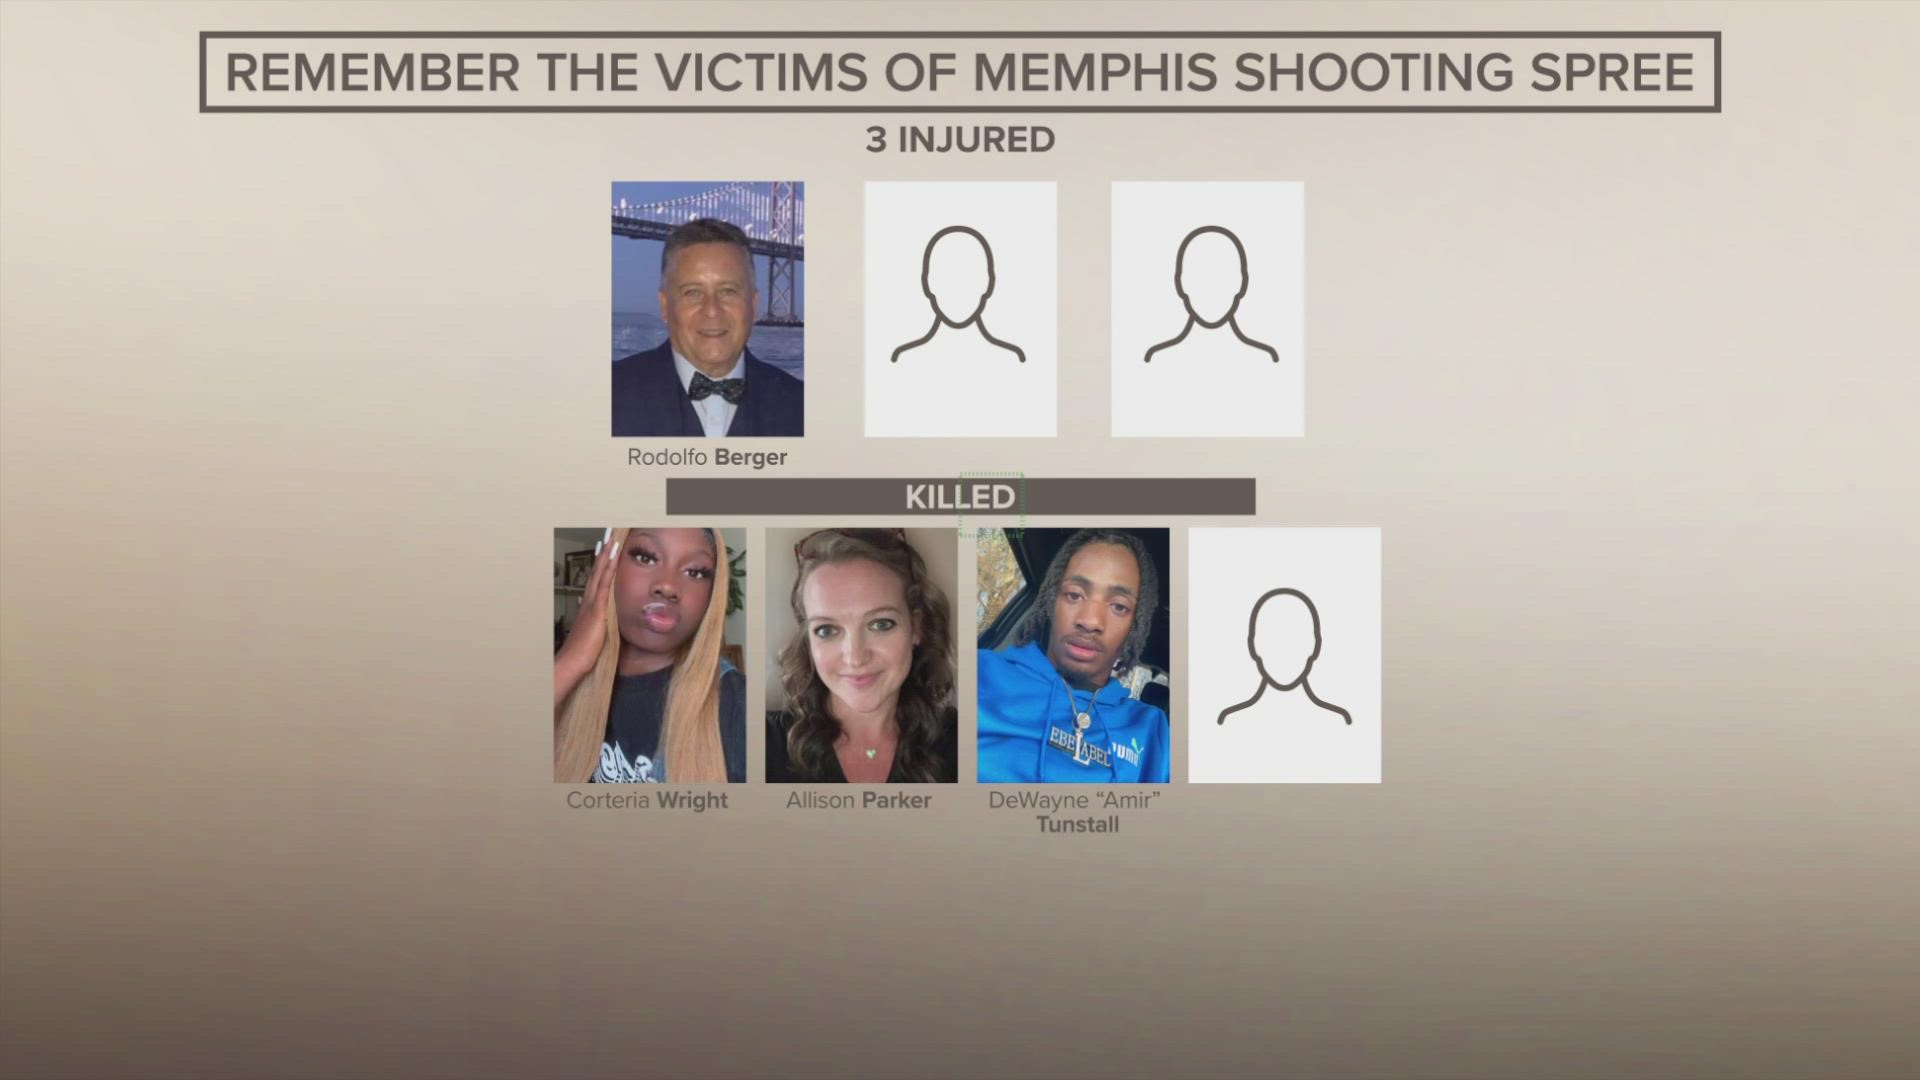 Family, friends, and Memphis are grieving and sending prayers to those affected by the tragedy.